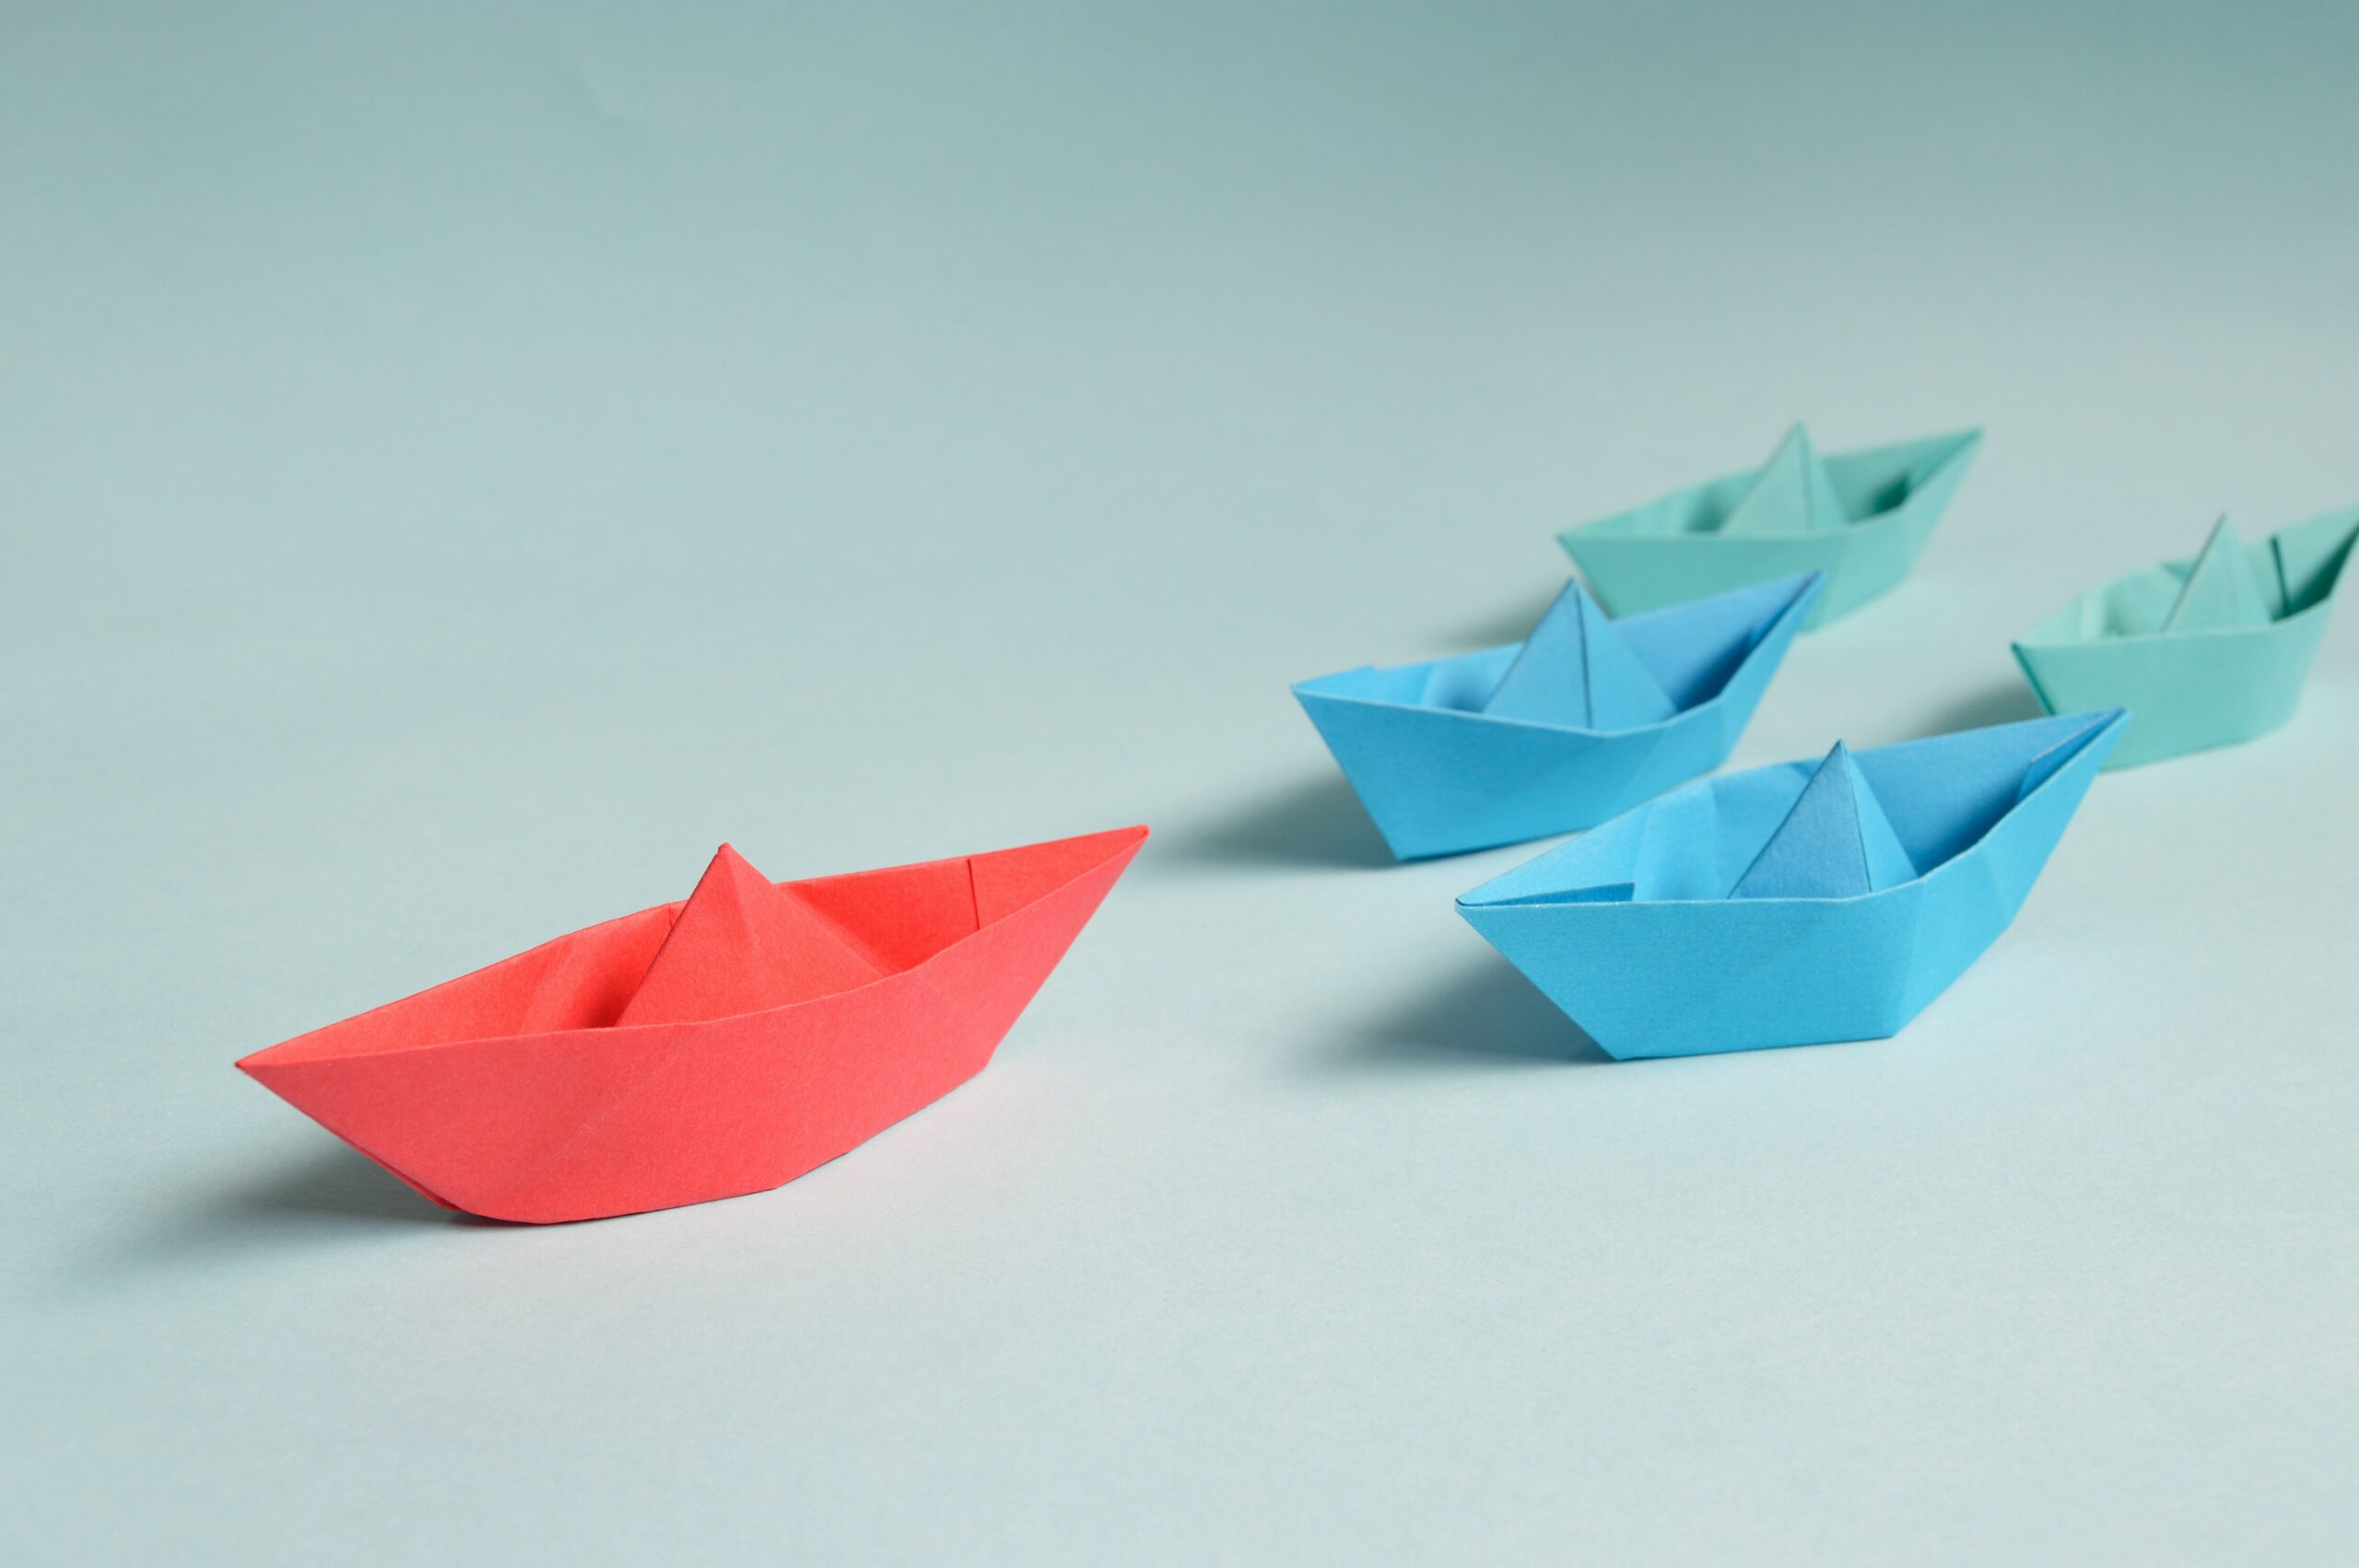 Blue paper boats being led by a red paper boat.